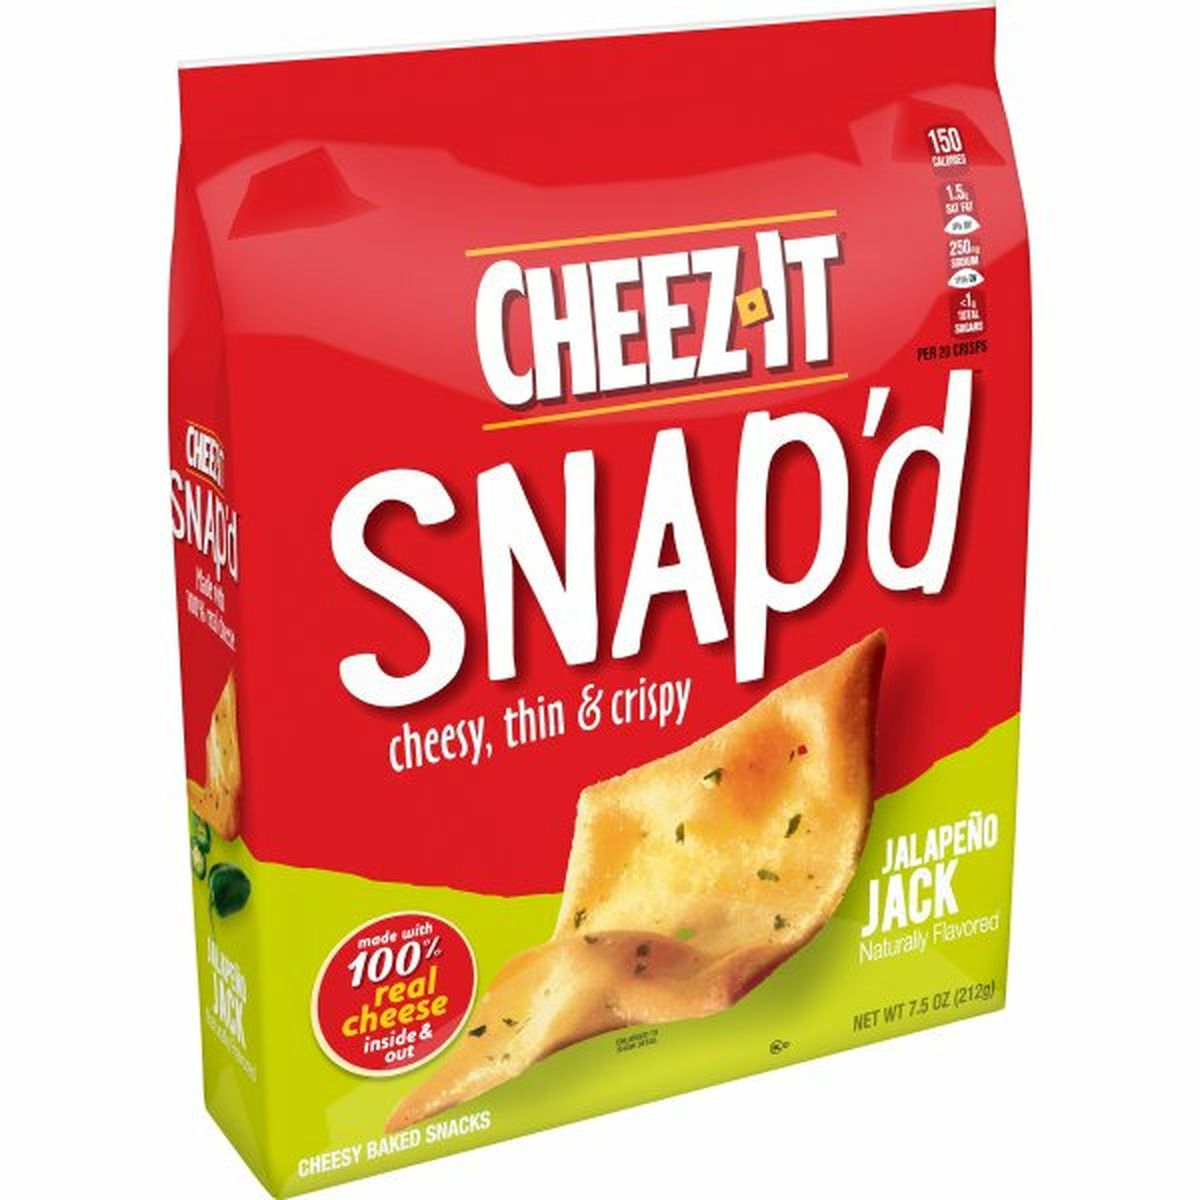 Calories in Cheez-It Crackers Cheez-It Cheesy Baked Snacks, Jalapeno Jack, 7.5oz